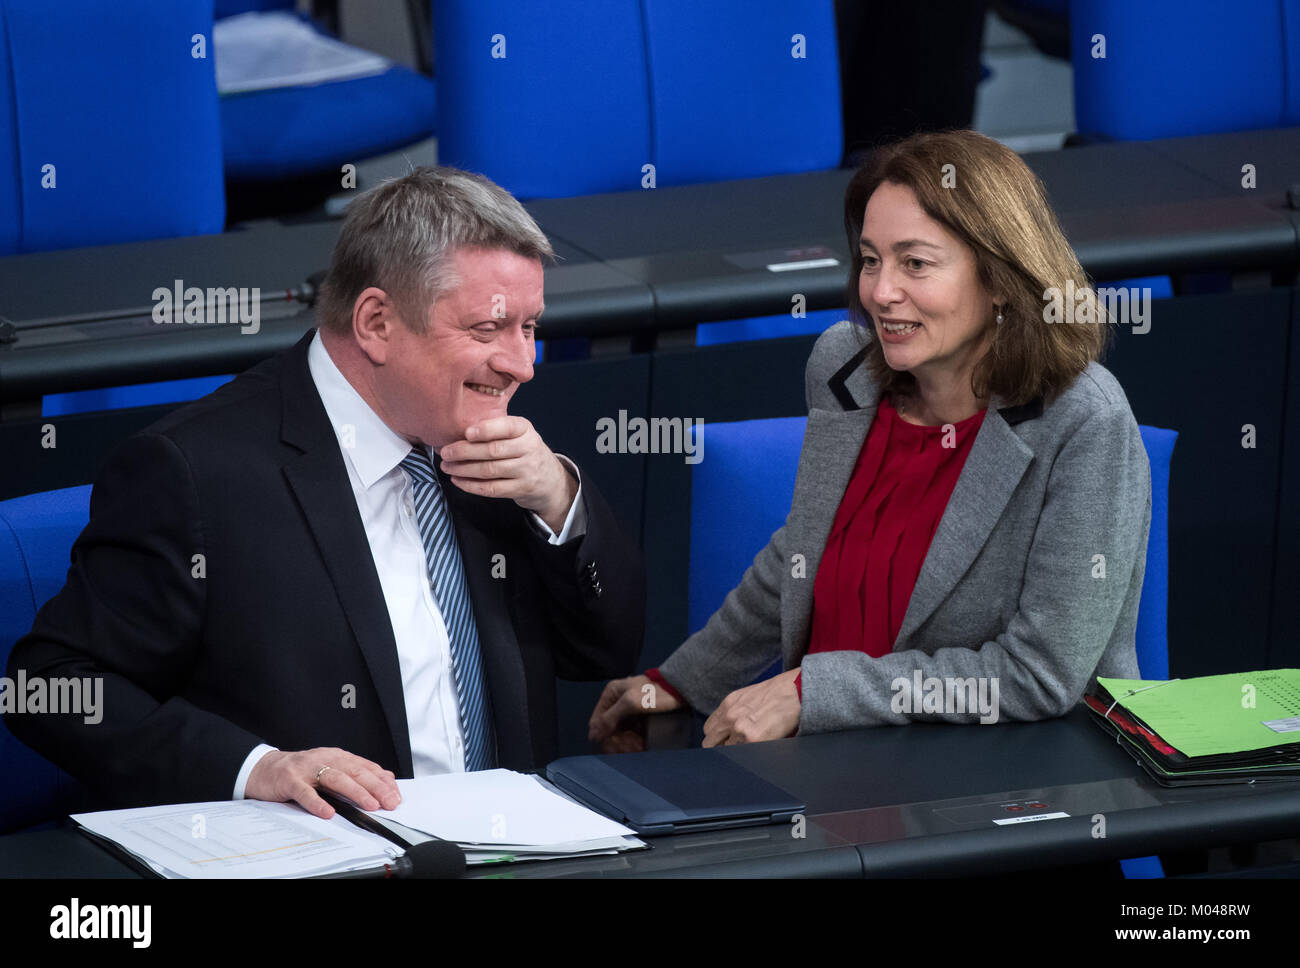 Berlin, Germany. 19th Jan, 2018. German Health Minister Hermann Groehe (CDU) speaks with Katarina Barley (SPD) at a plenary session of the Bundestag in Berlin, Germany, 19 January 2018. Parliamentarians are currently discussing refugees, unemployment insurance and military expenditure. Credit: Bernd von Jutrczenka/dpa/Alamy Live News Stock Photo